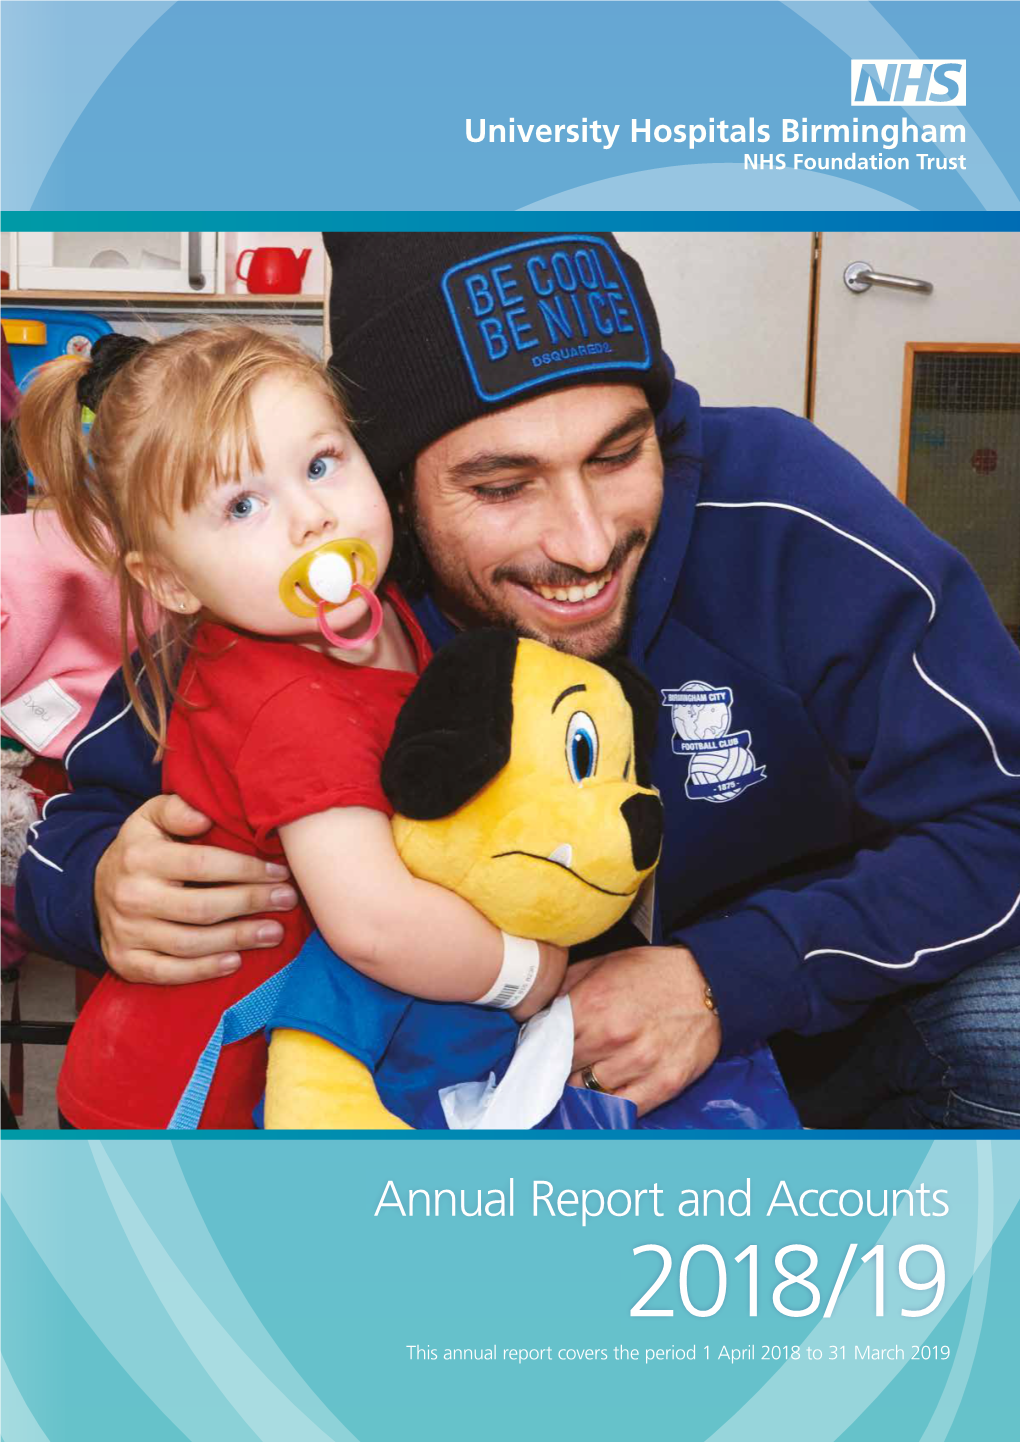 Annual Report and Accounts 2018/19 Accounts and Report Annual